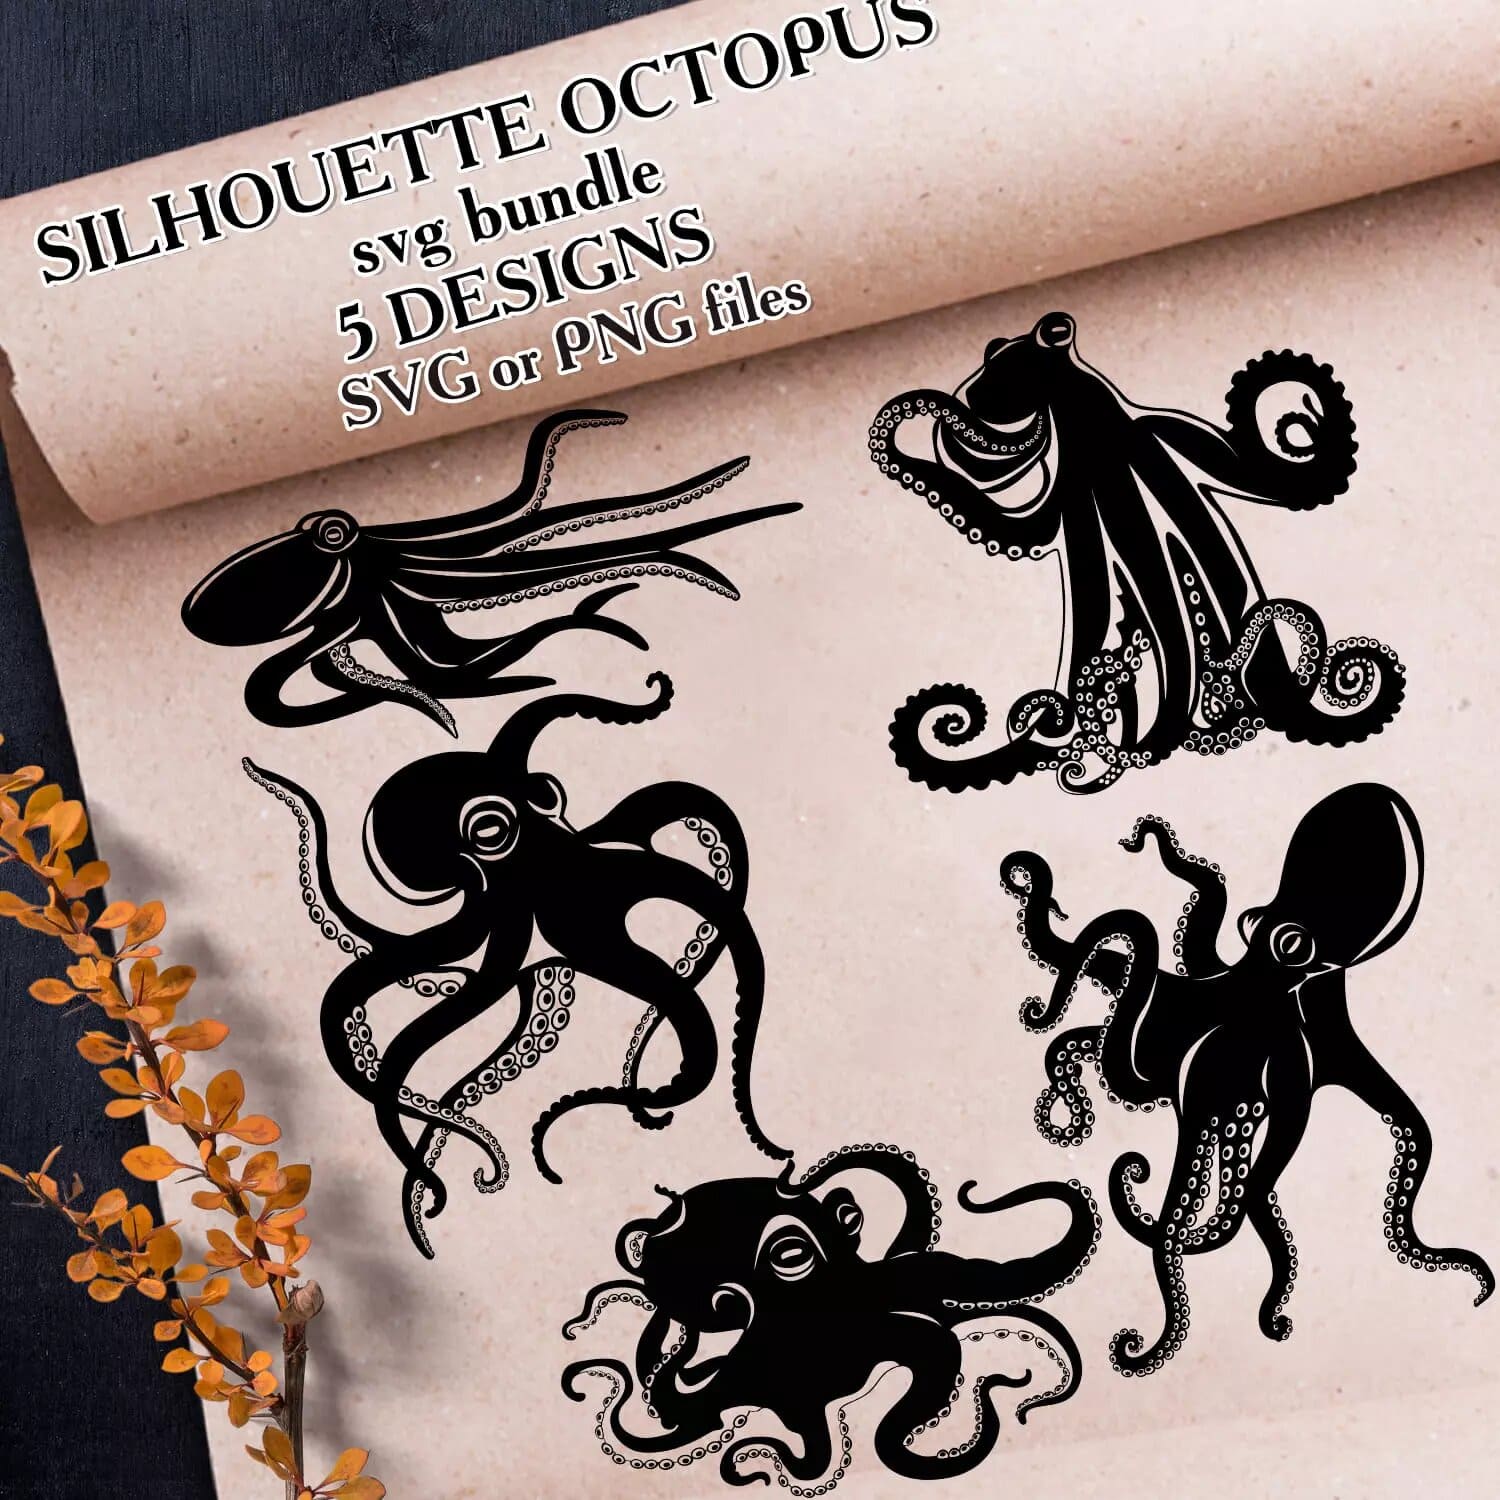 Sheet of paper with a bunch of octopus designs on it.